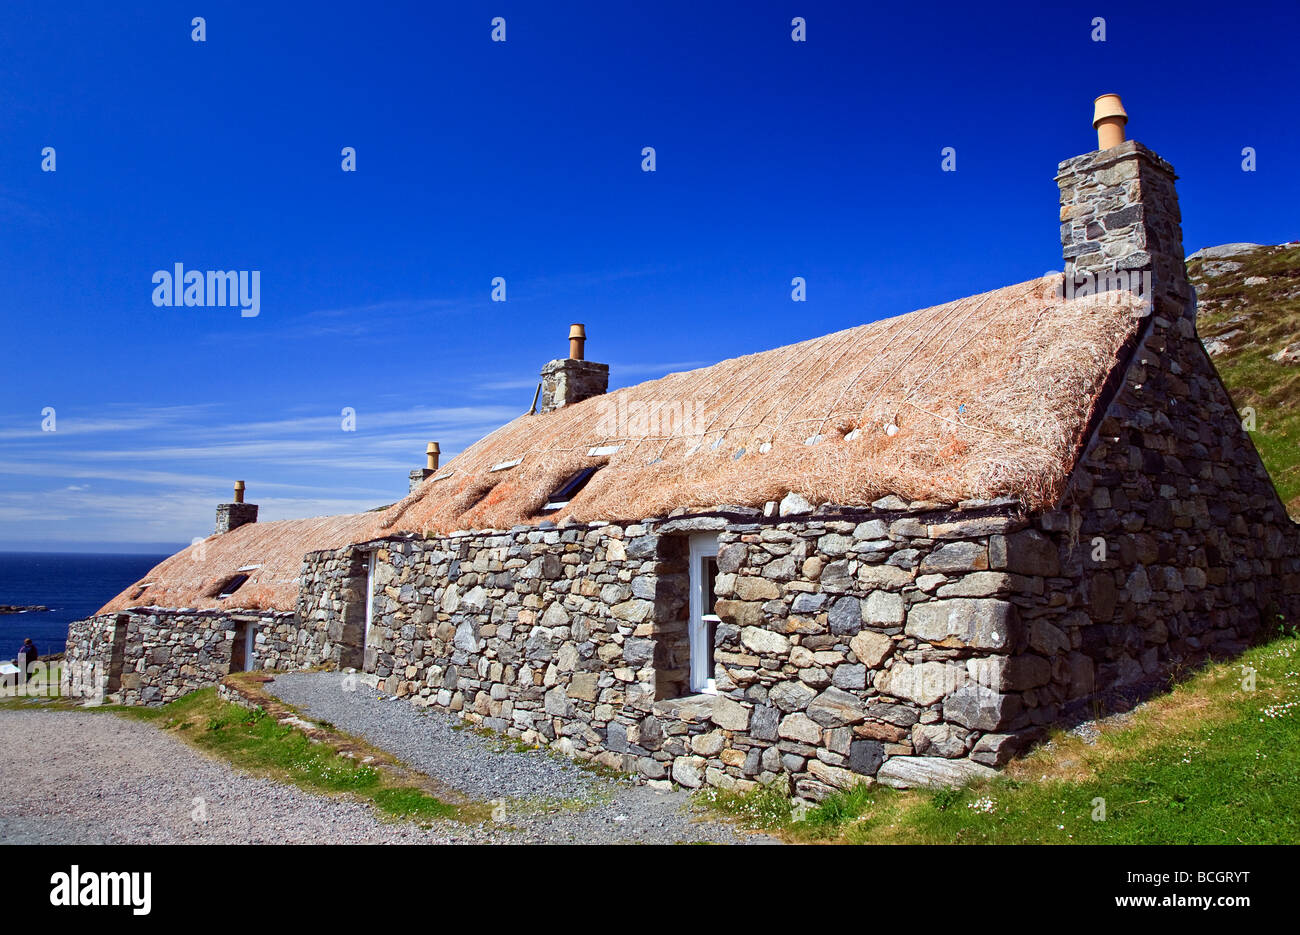 The Gearrannan Blackhouses Carloway Isle of Lewis, Outer Hebrides, western isles, Scotland, UK 2009 Stock Photo